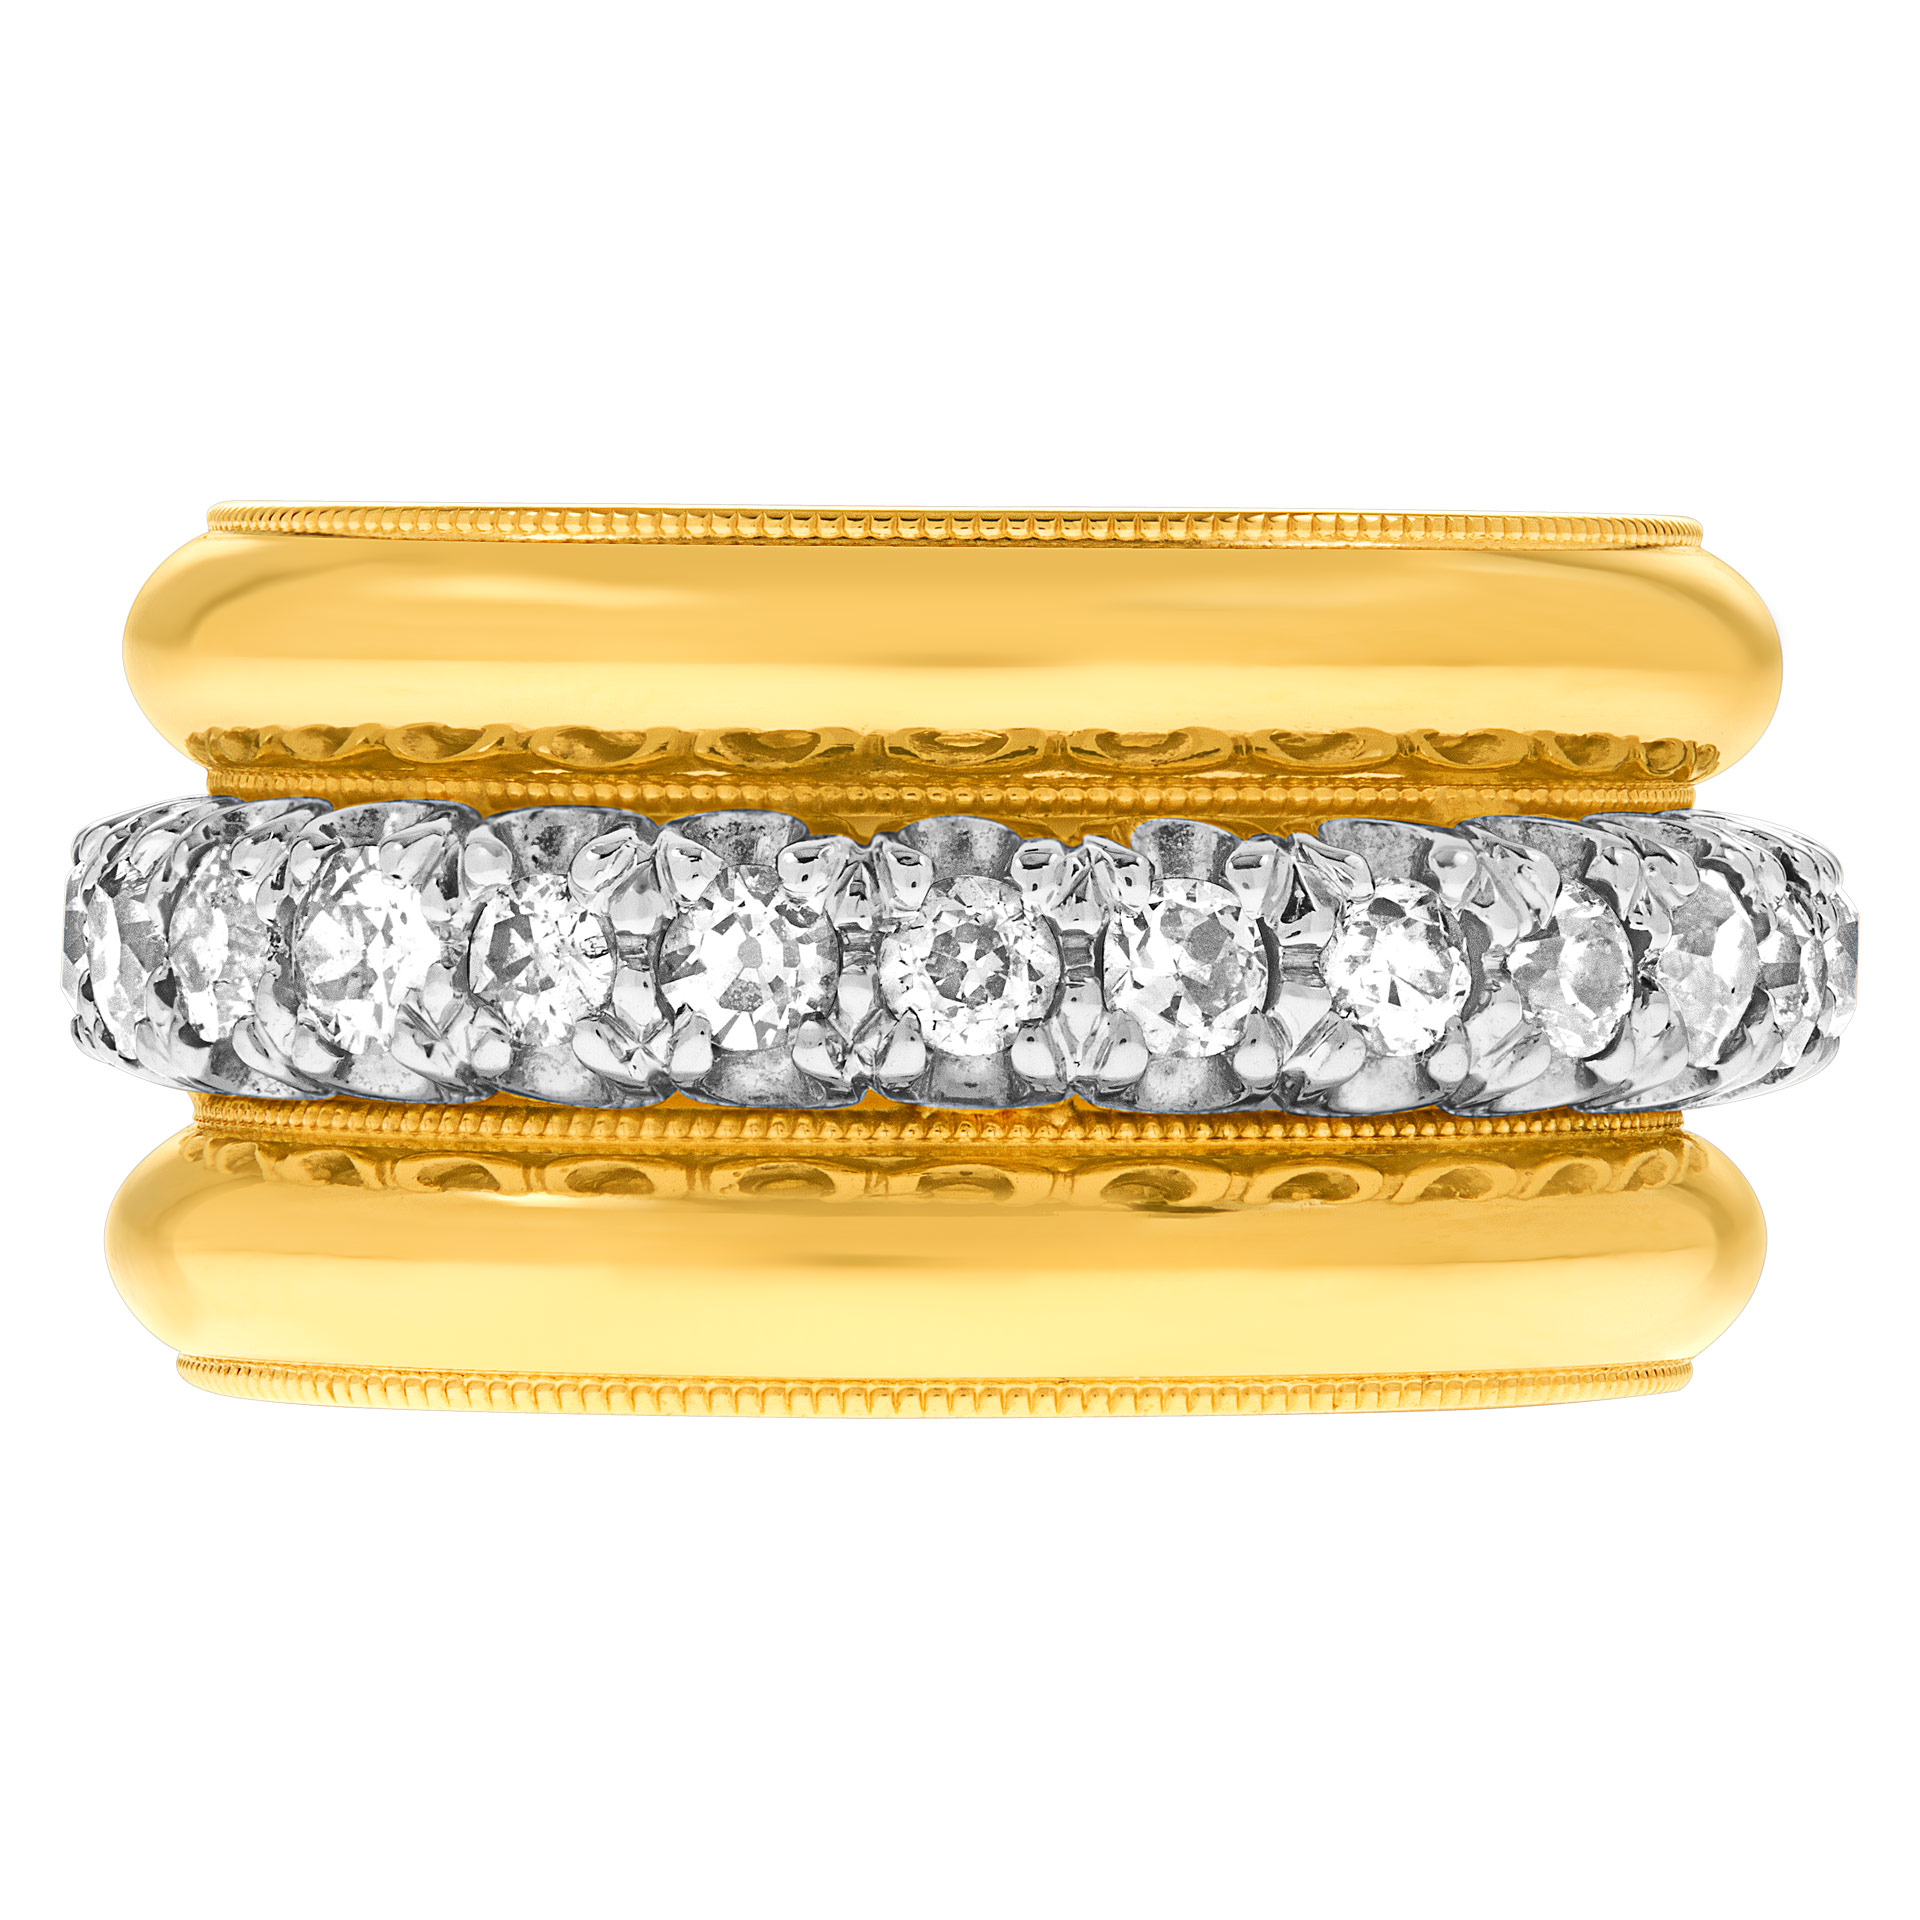 Wide high-class band in 14k yellow gold. 2 carats in diamonds. Size 7.